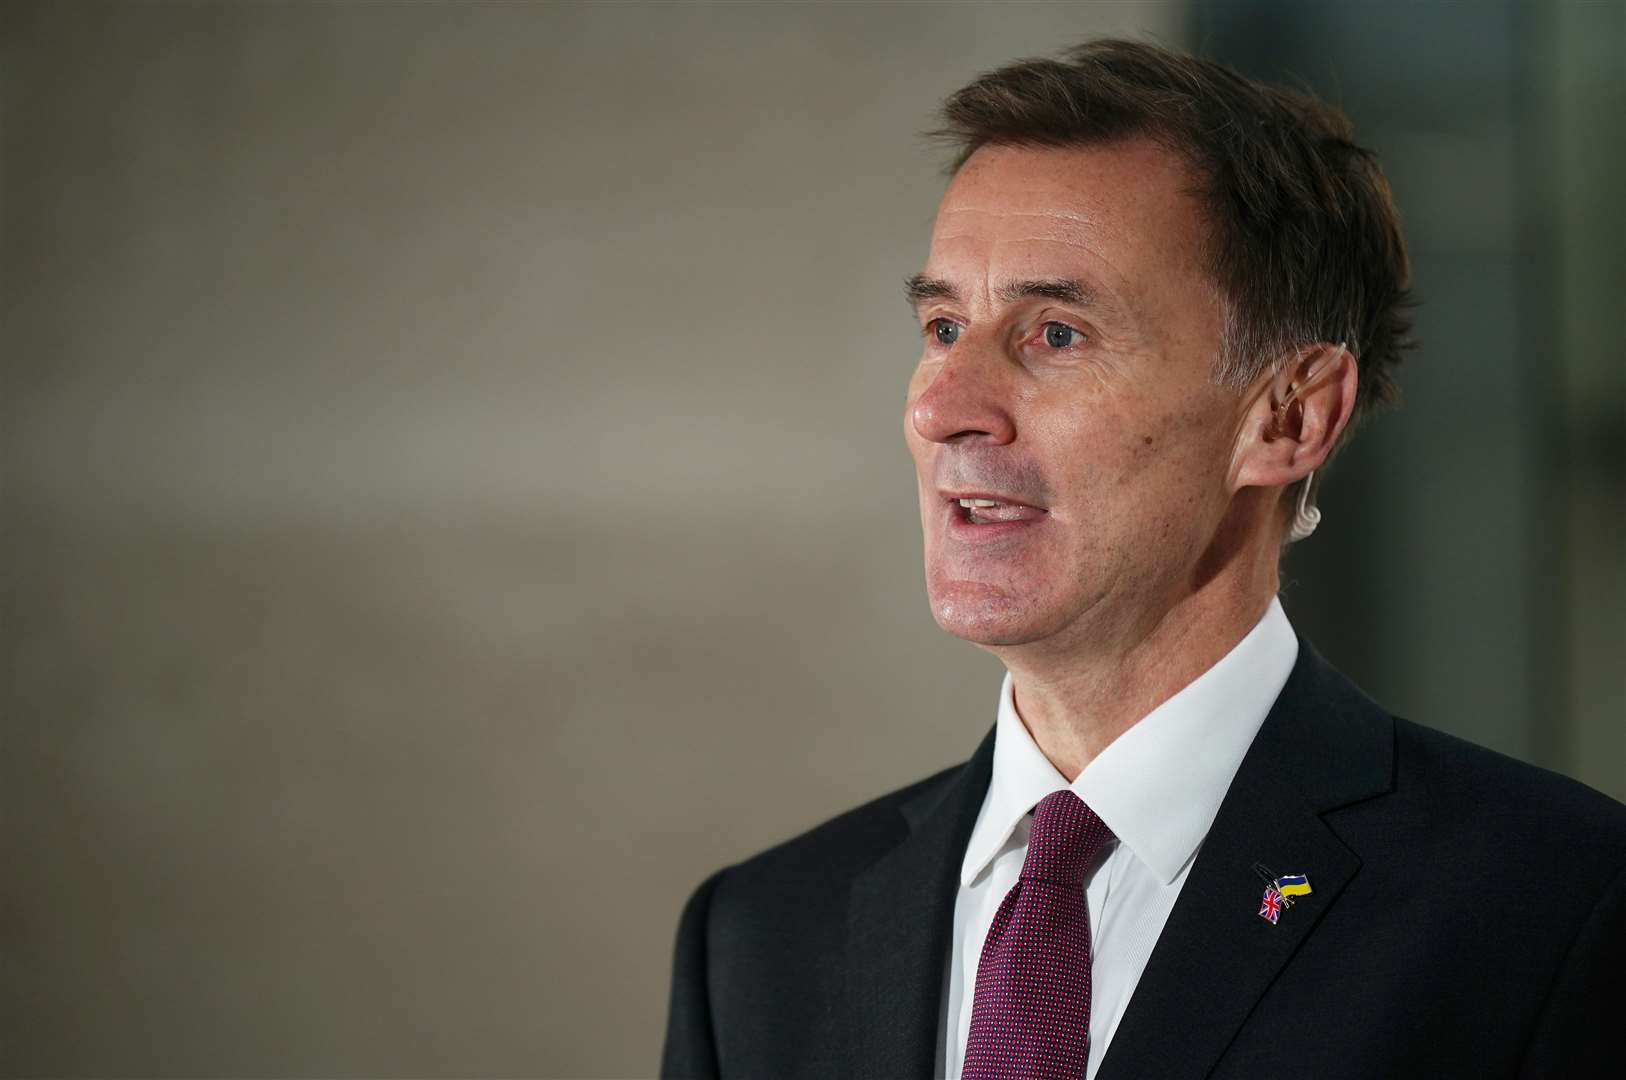 Jeremy Hunt said there is a ‘clear plan’ to halve inflation (Aaron Chown/PA)